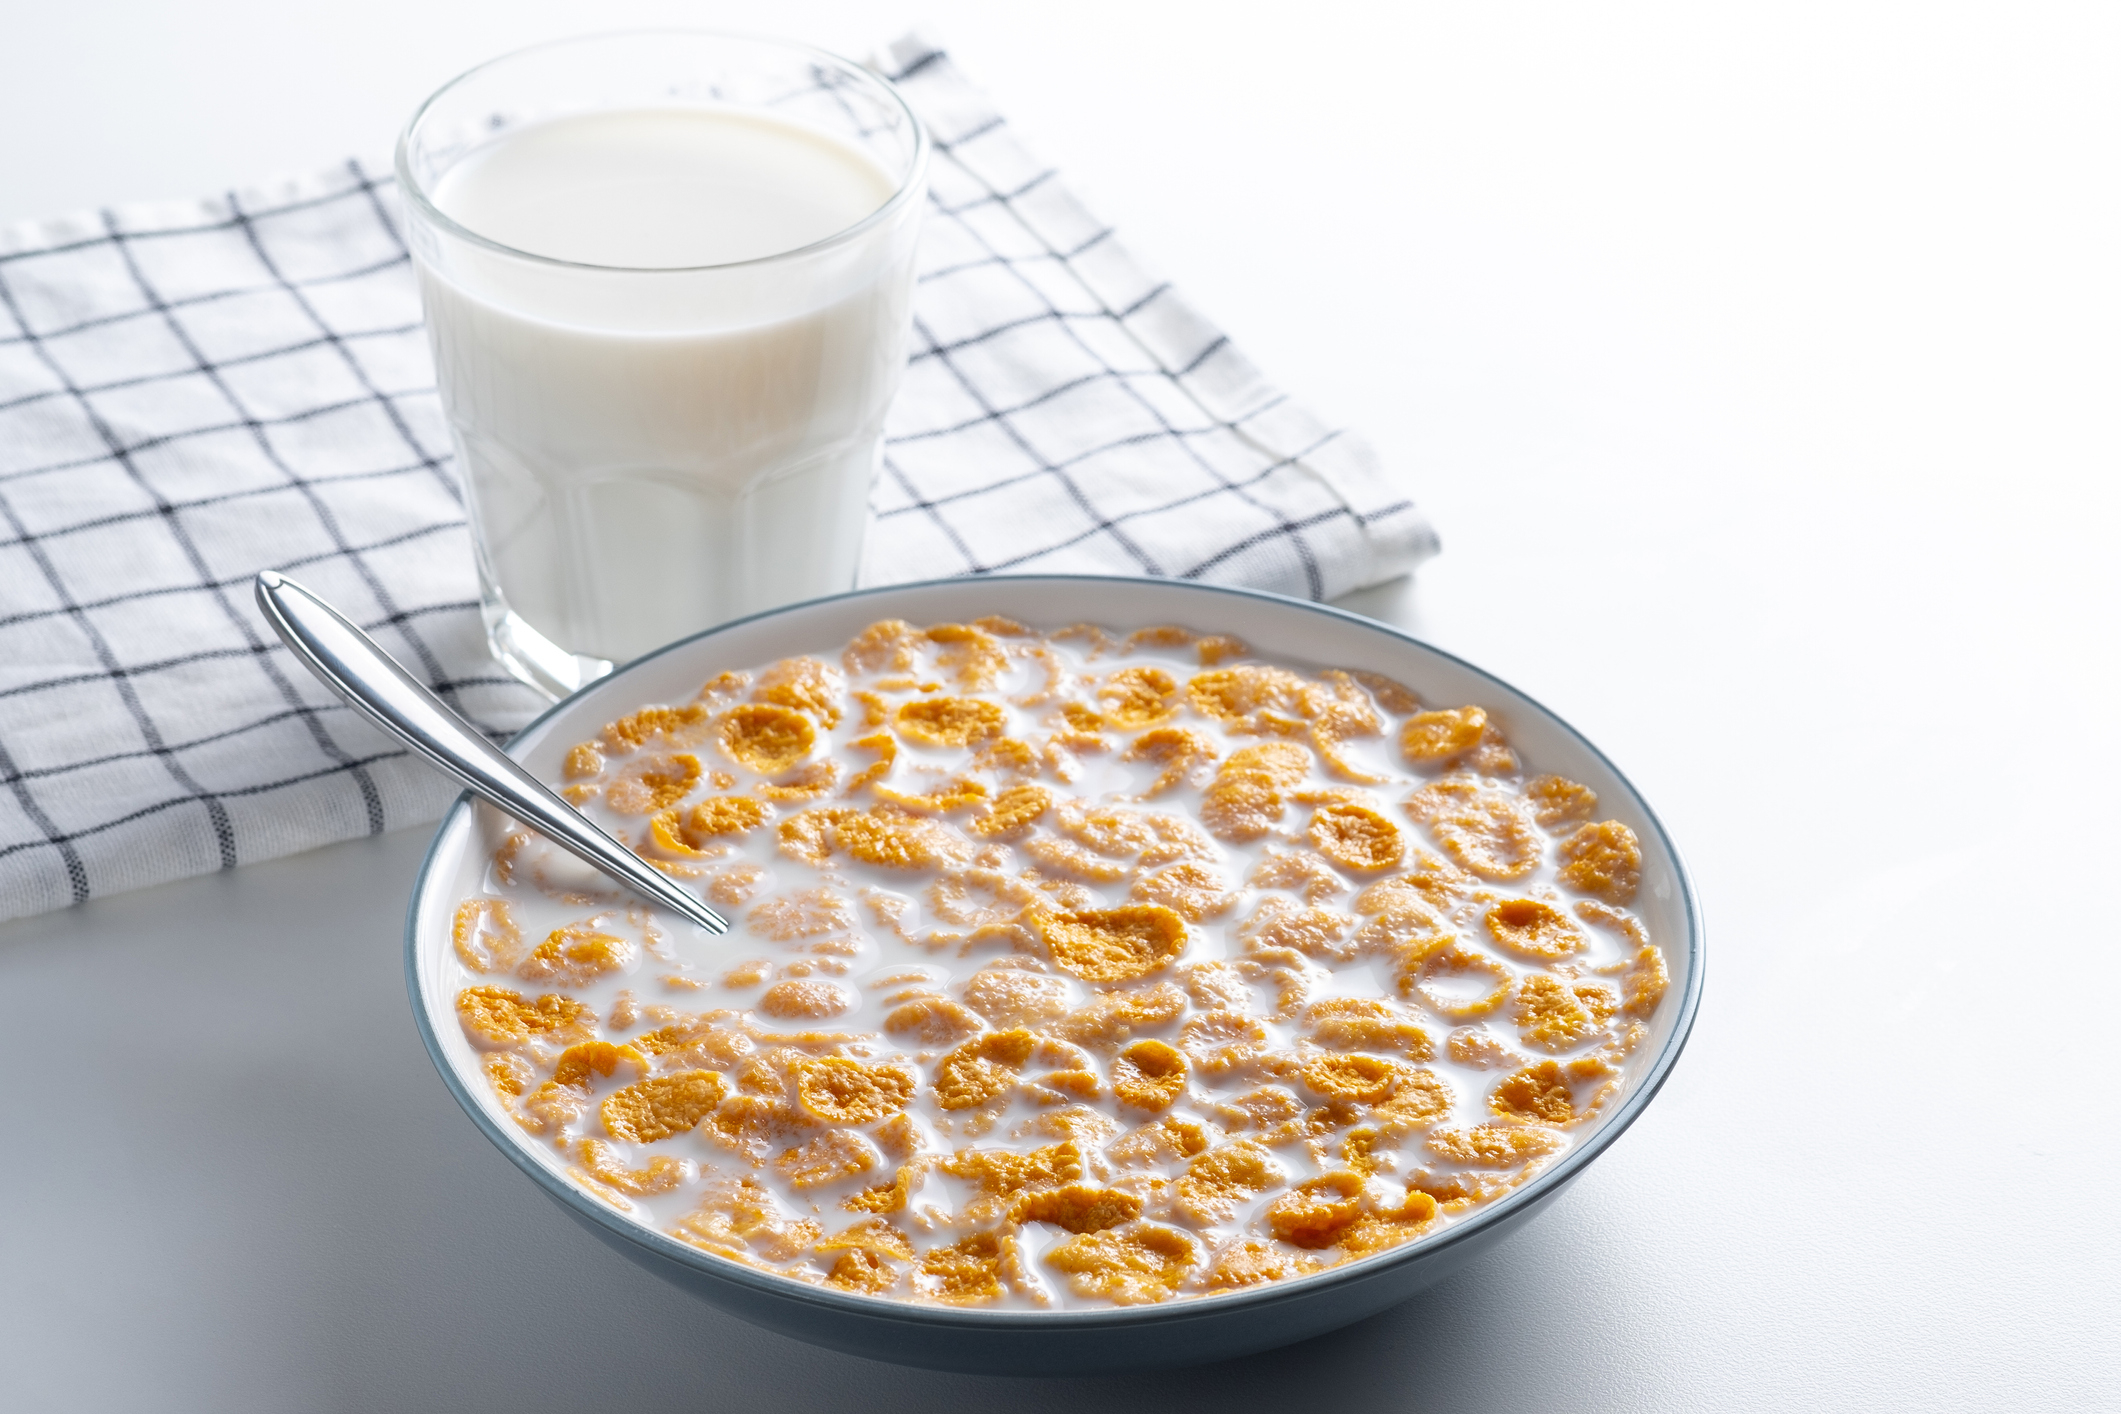 a bowl of cereal and a glass of milk